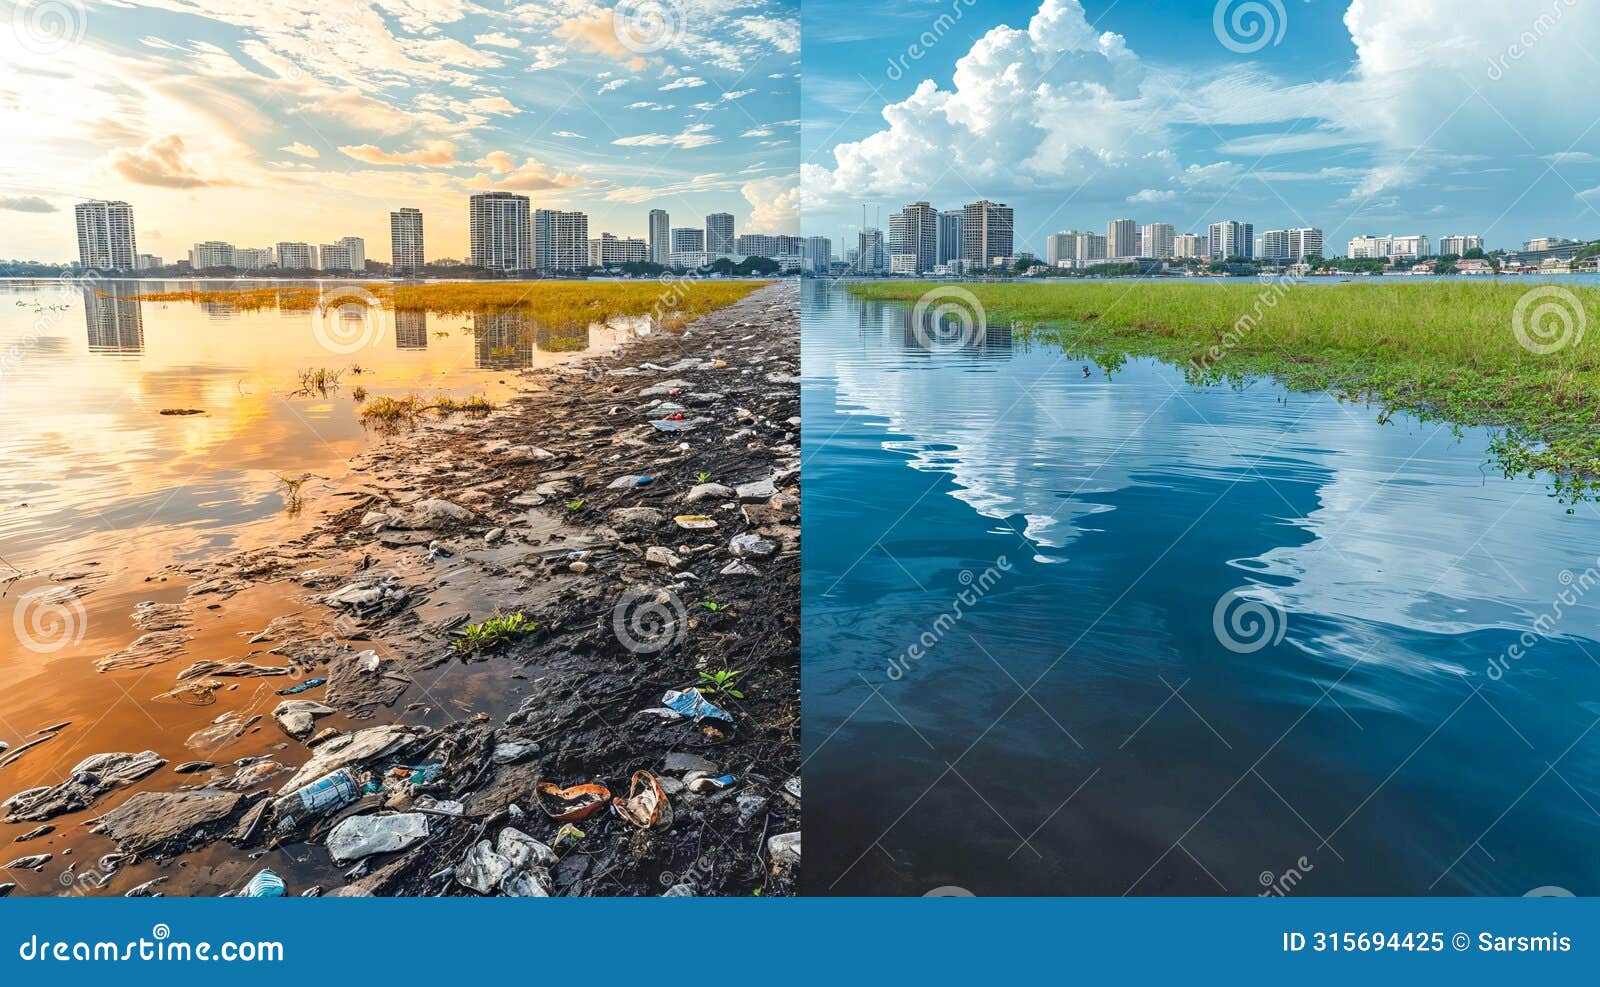 contrast of pollution and cleanliness in urban water bodies